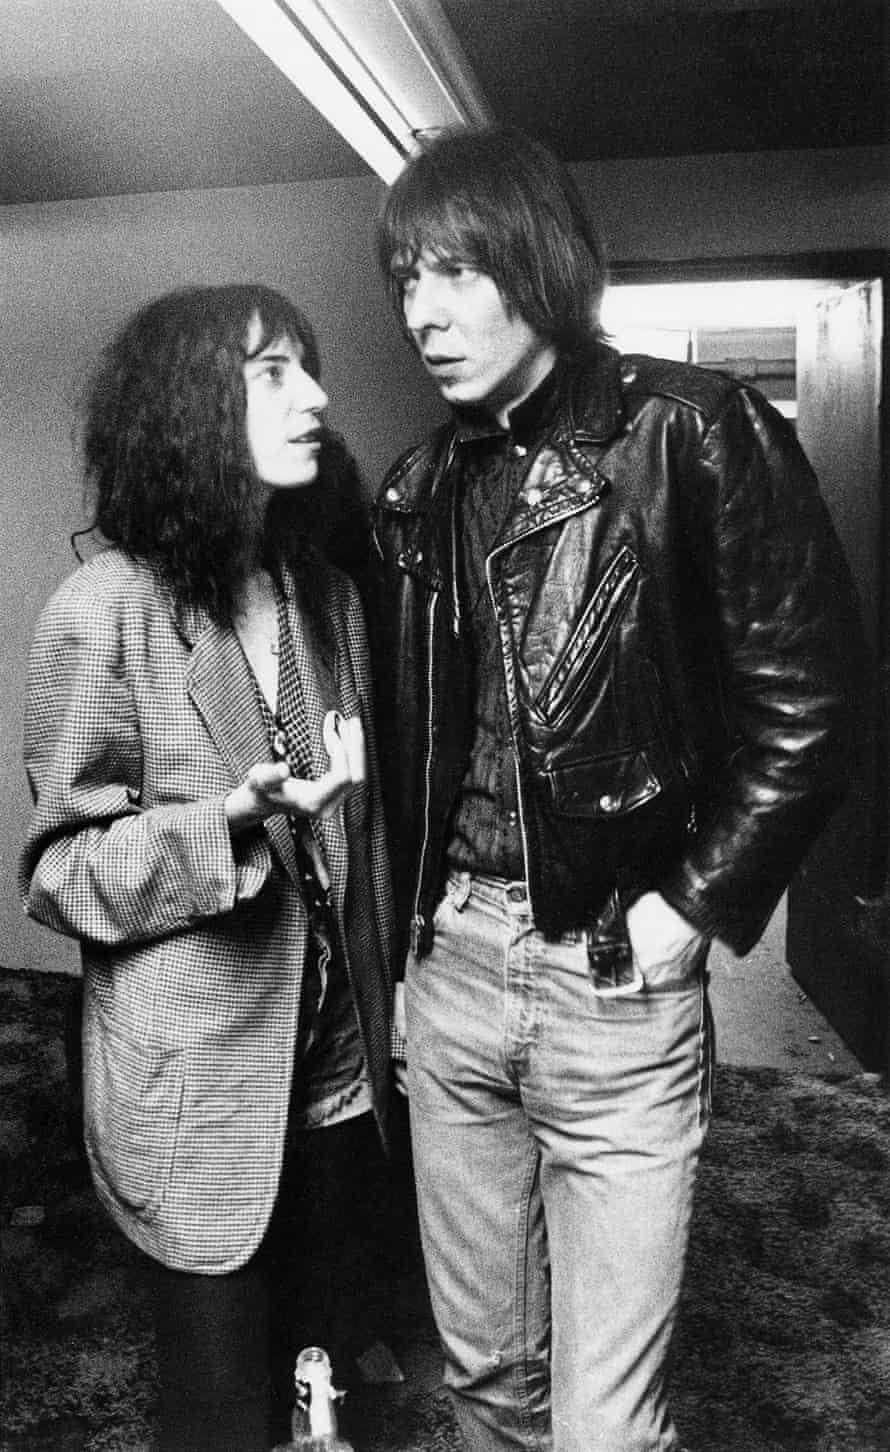 Patti Smith with her husband and collaborator the guitarist Fred ‘Sonic’ Smith in 1978.